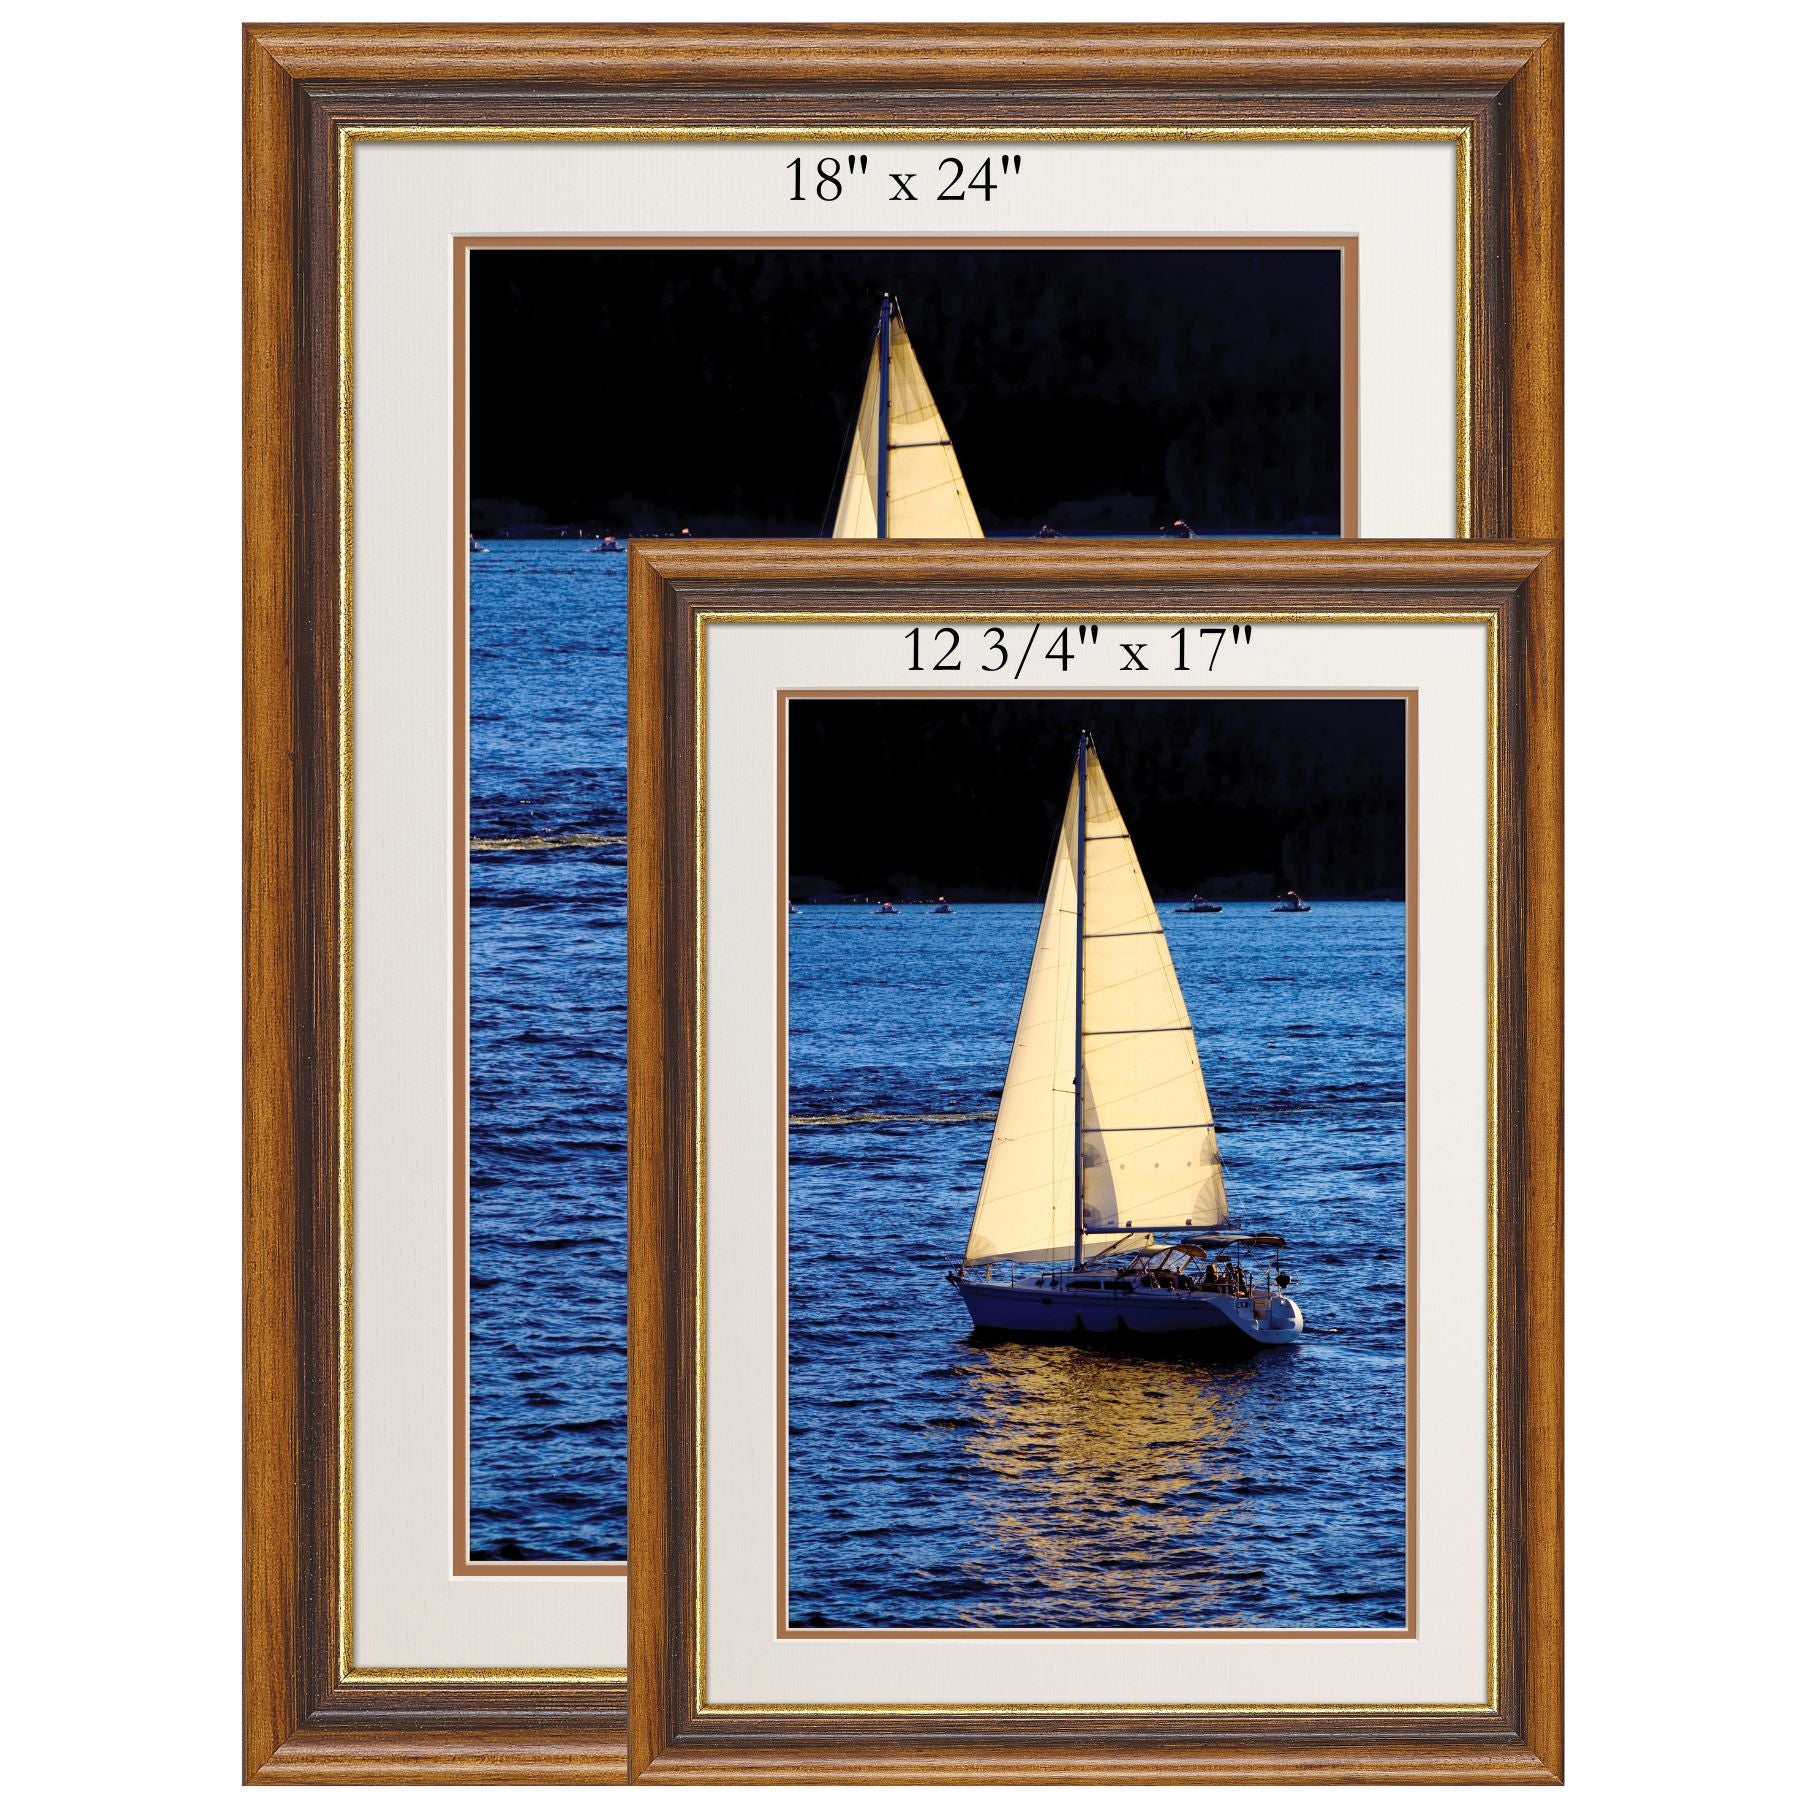 BeMoved by Evening Light Sailing Poster. Movable and Removable!